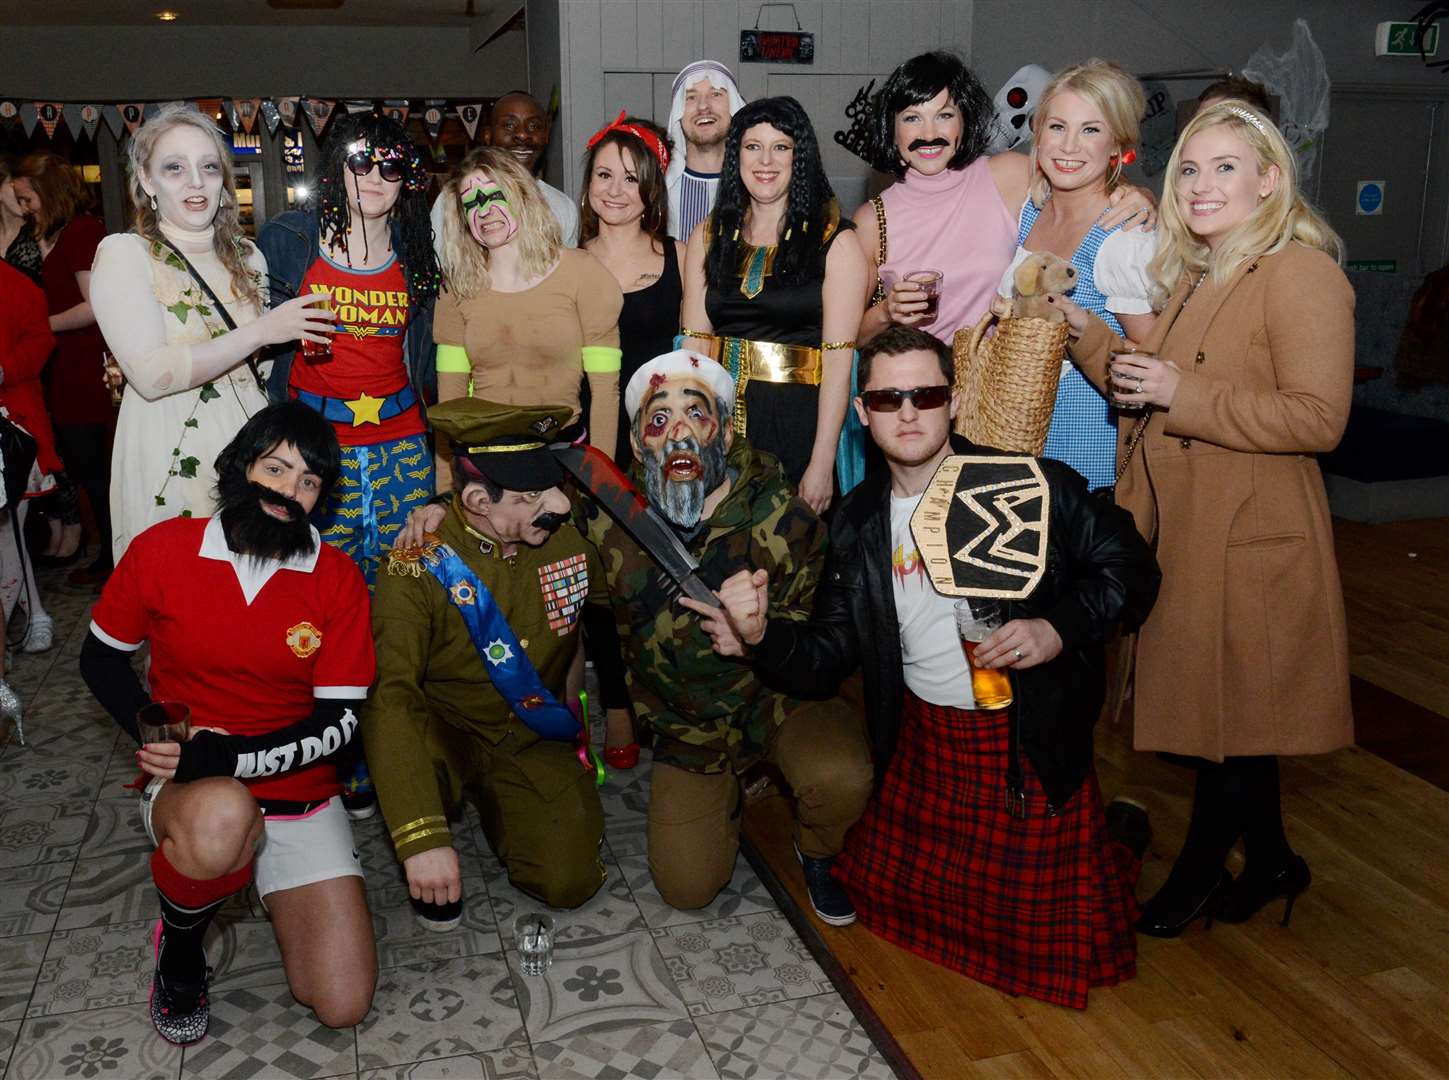 Dead Celebs Halloween special from Crossfit 57 North members. CitySeen on Halloween 31/10/15. Picture: Alison White